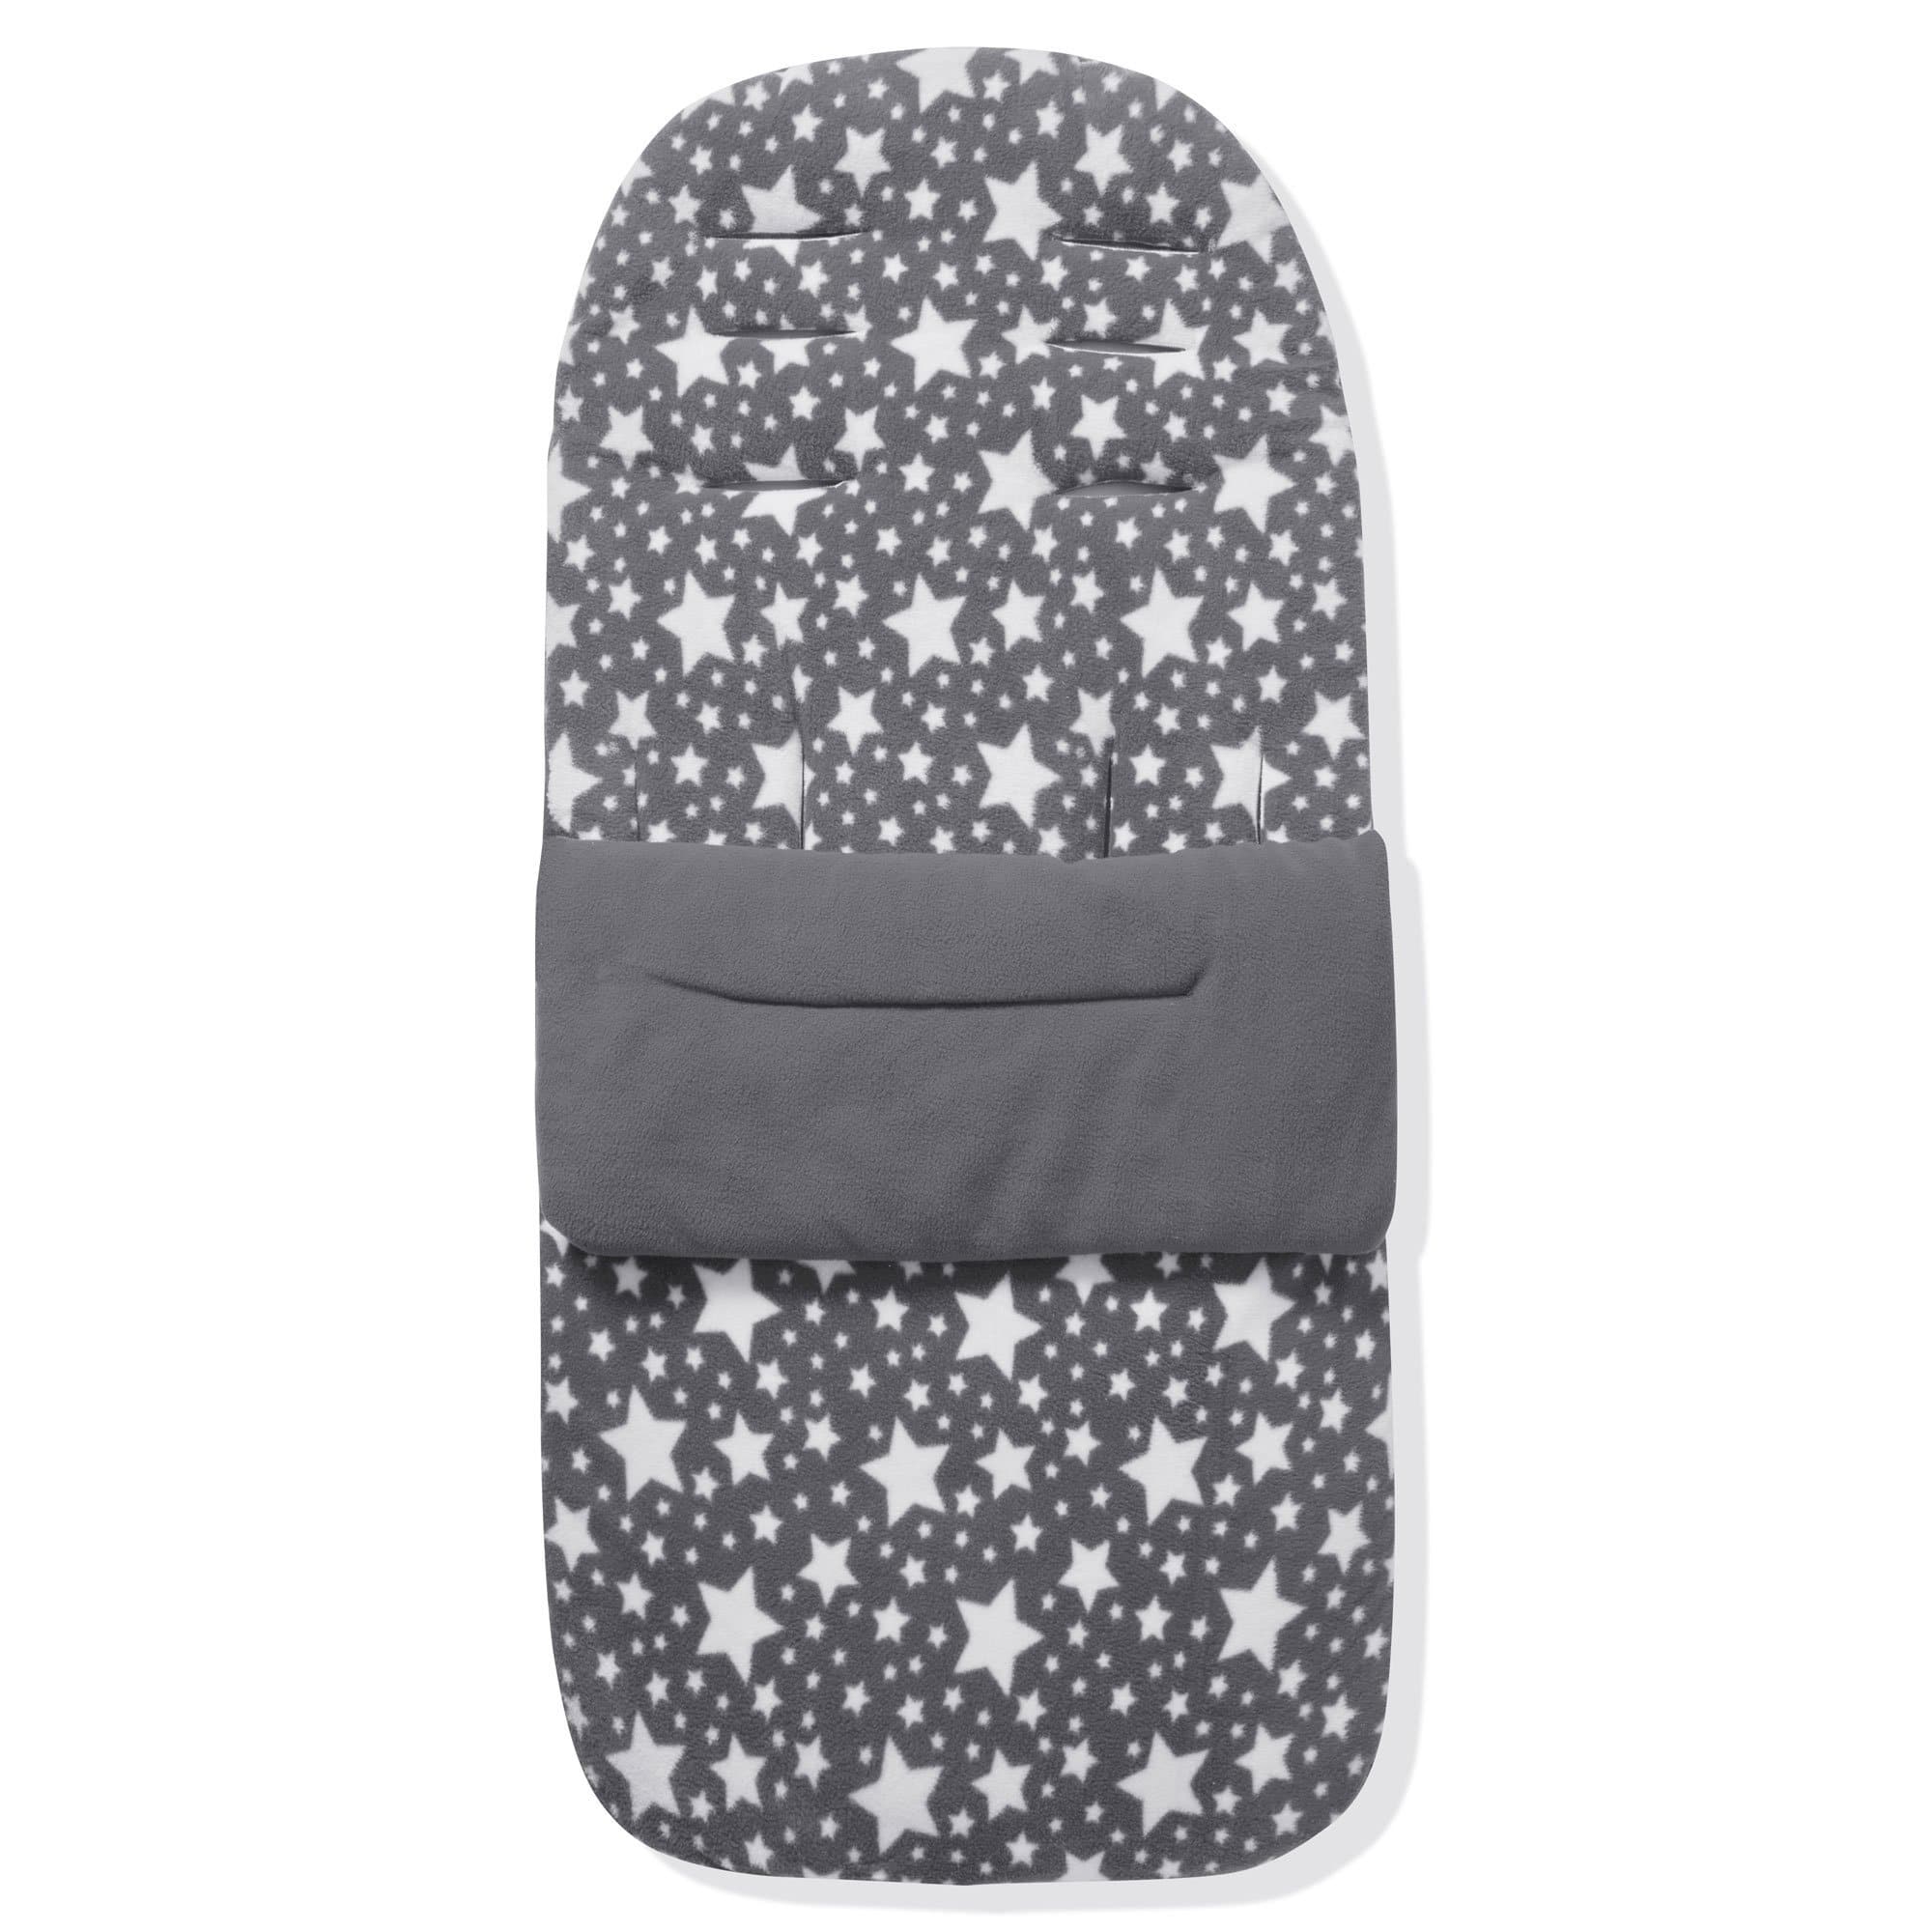 Fleece Footmuff / Cosy Toes Compatible with Recaro - Grey Star / Fits All Models | For Your Little One